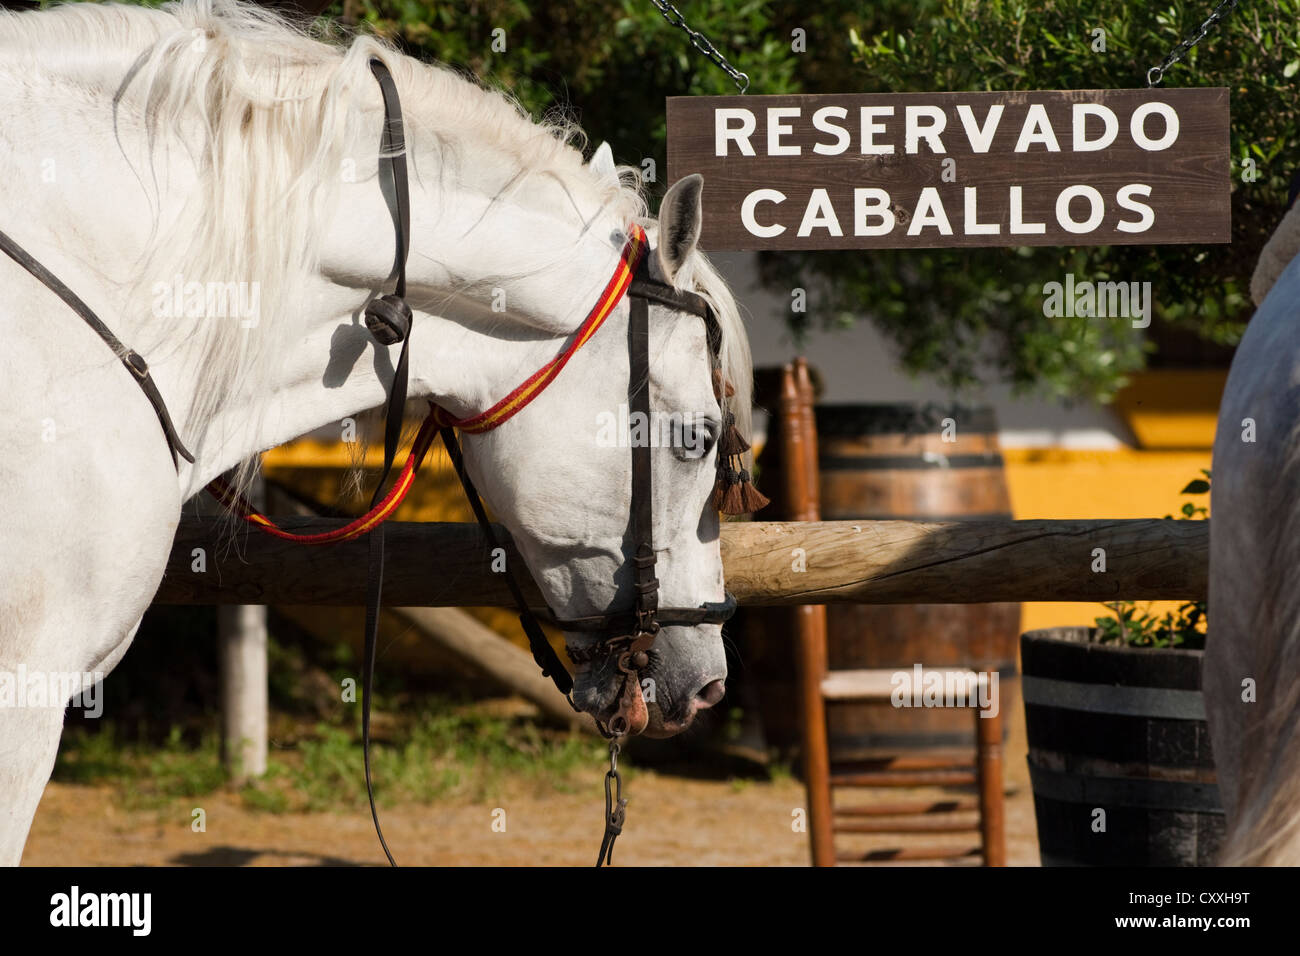 Bar and restaurant for horse-riders, Andalusian horse parked in front, El Rocio, Almonte, Huelva province, Andalusia, Spain Stock Photo